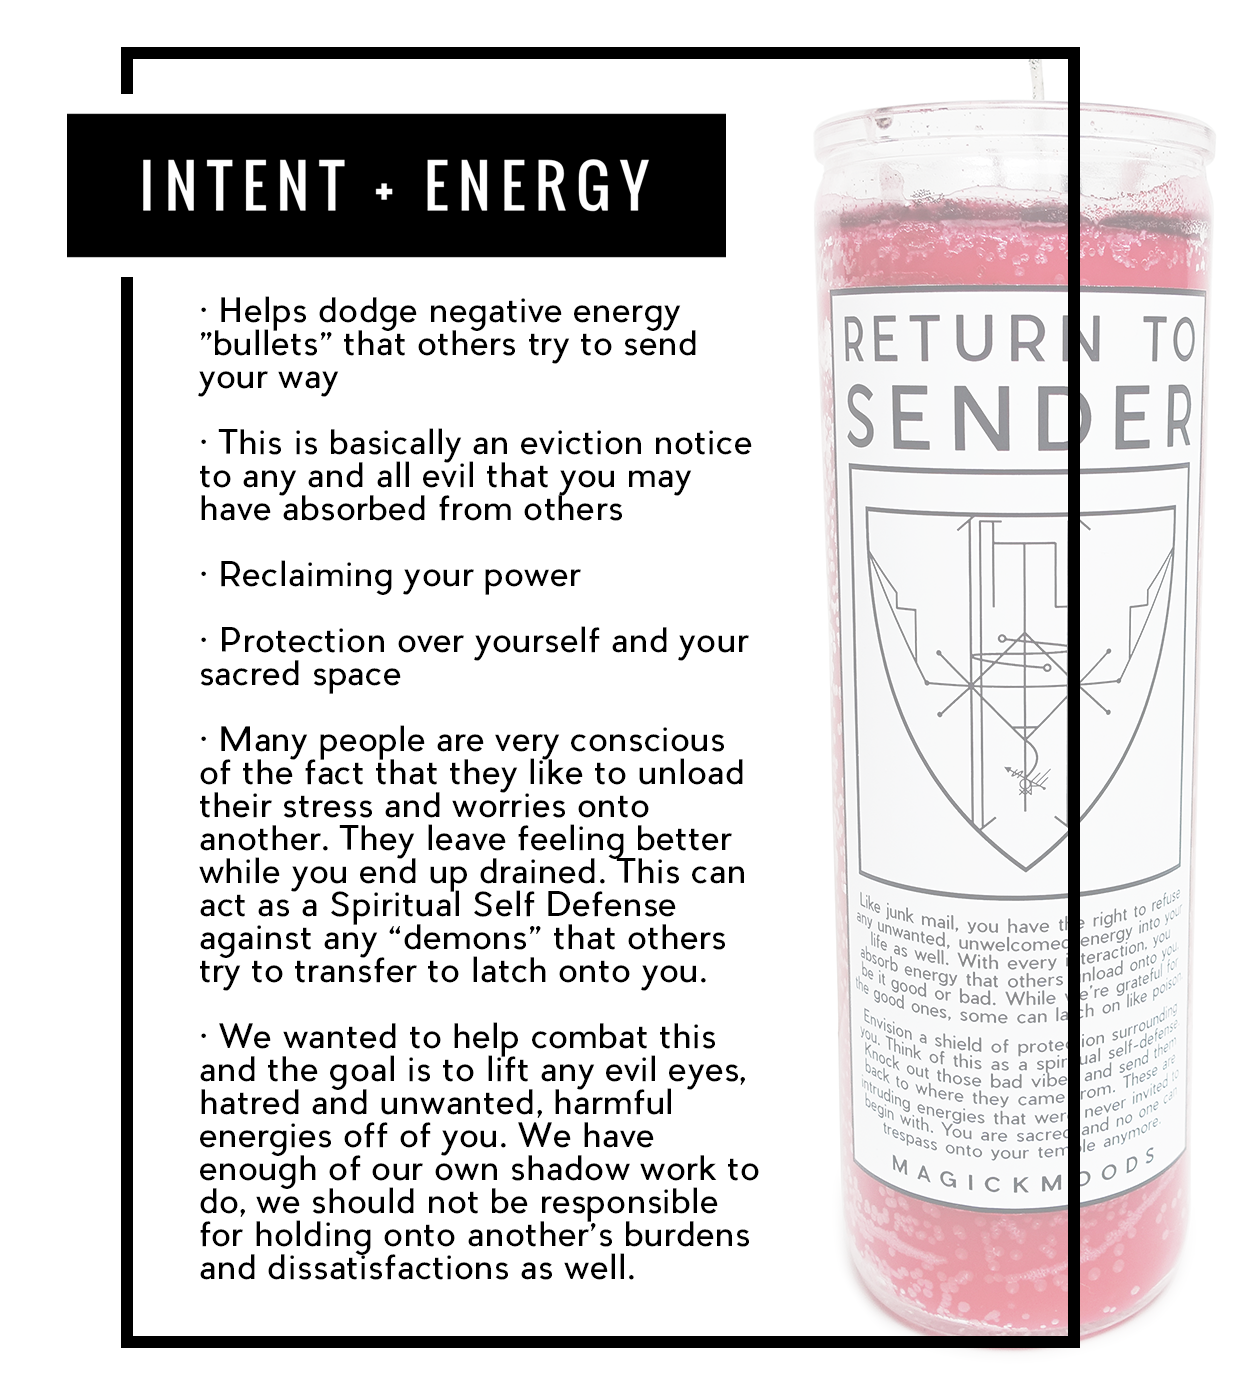 Return To Sender 7-Day Meditation Candle - PREORDER - Ships by July 28th, 2023